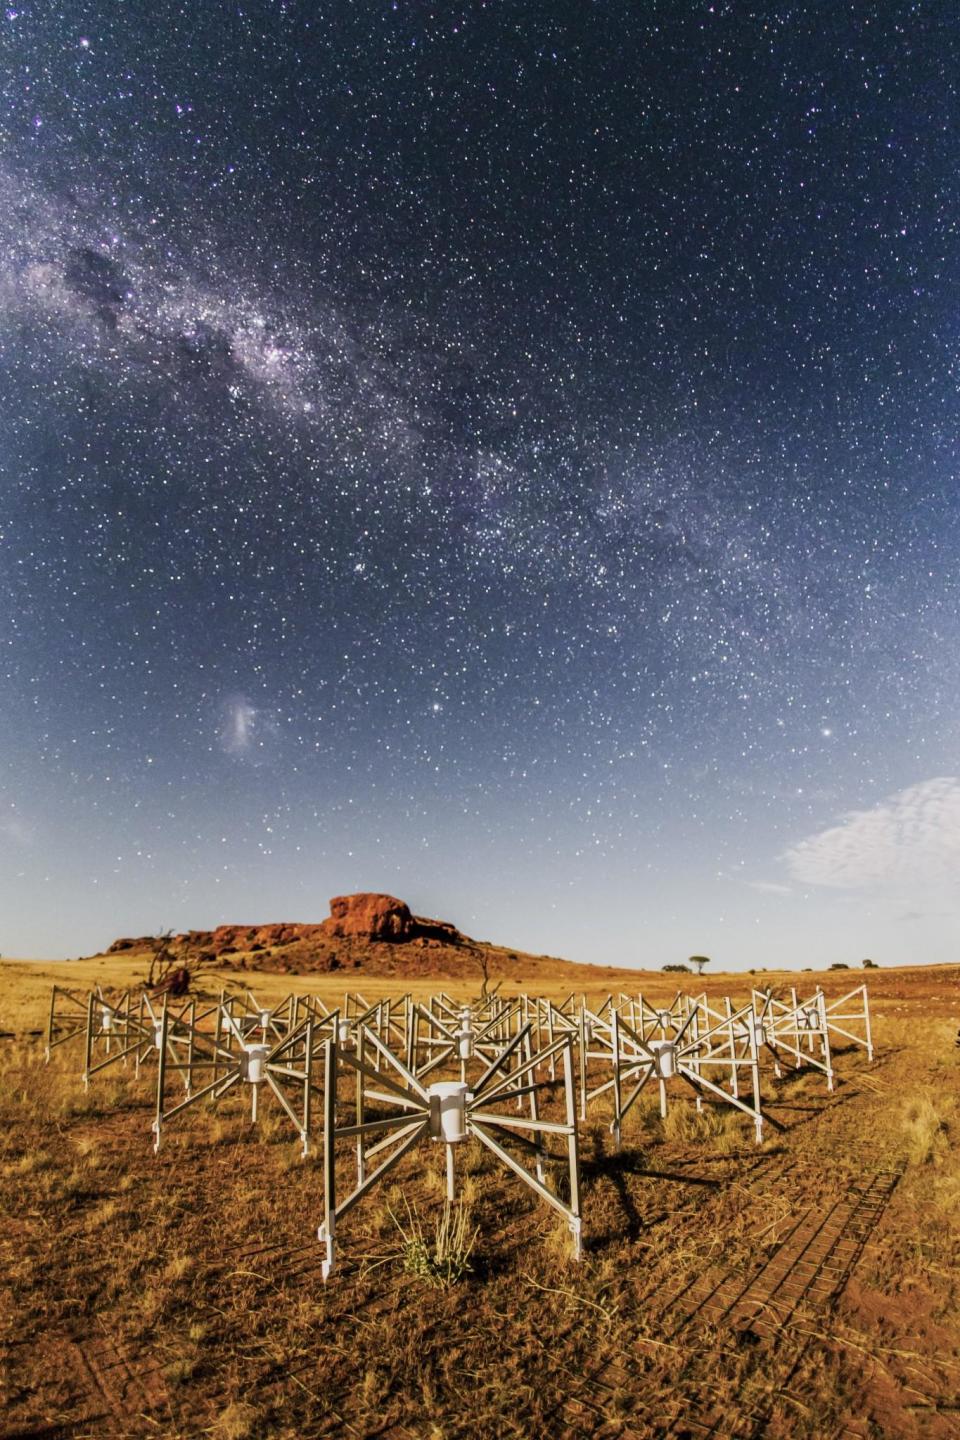 The telescope in Western Australia used to observe the mysterious space object. / Credit: Pete Wheeler, ICRAR